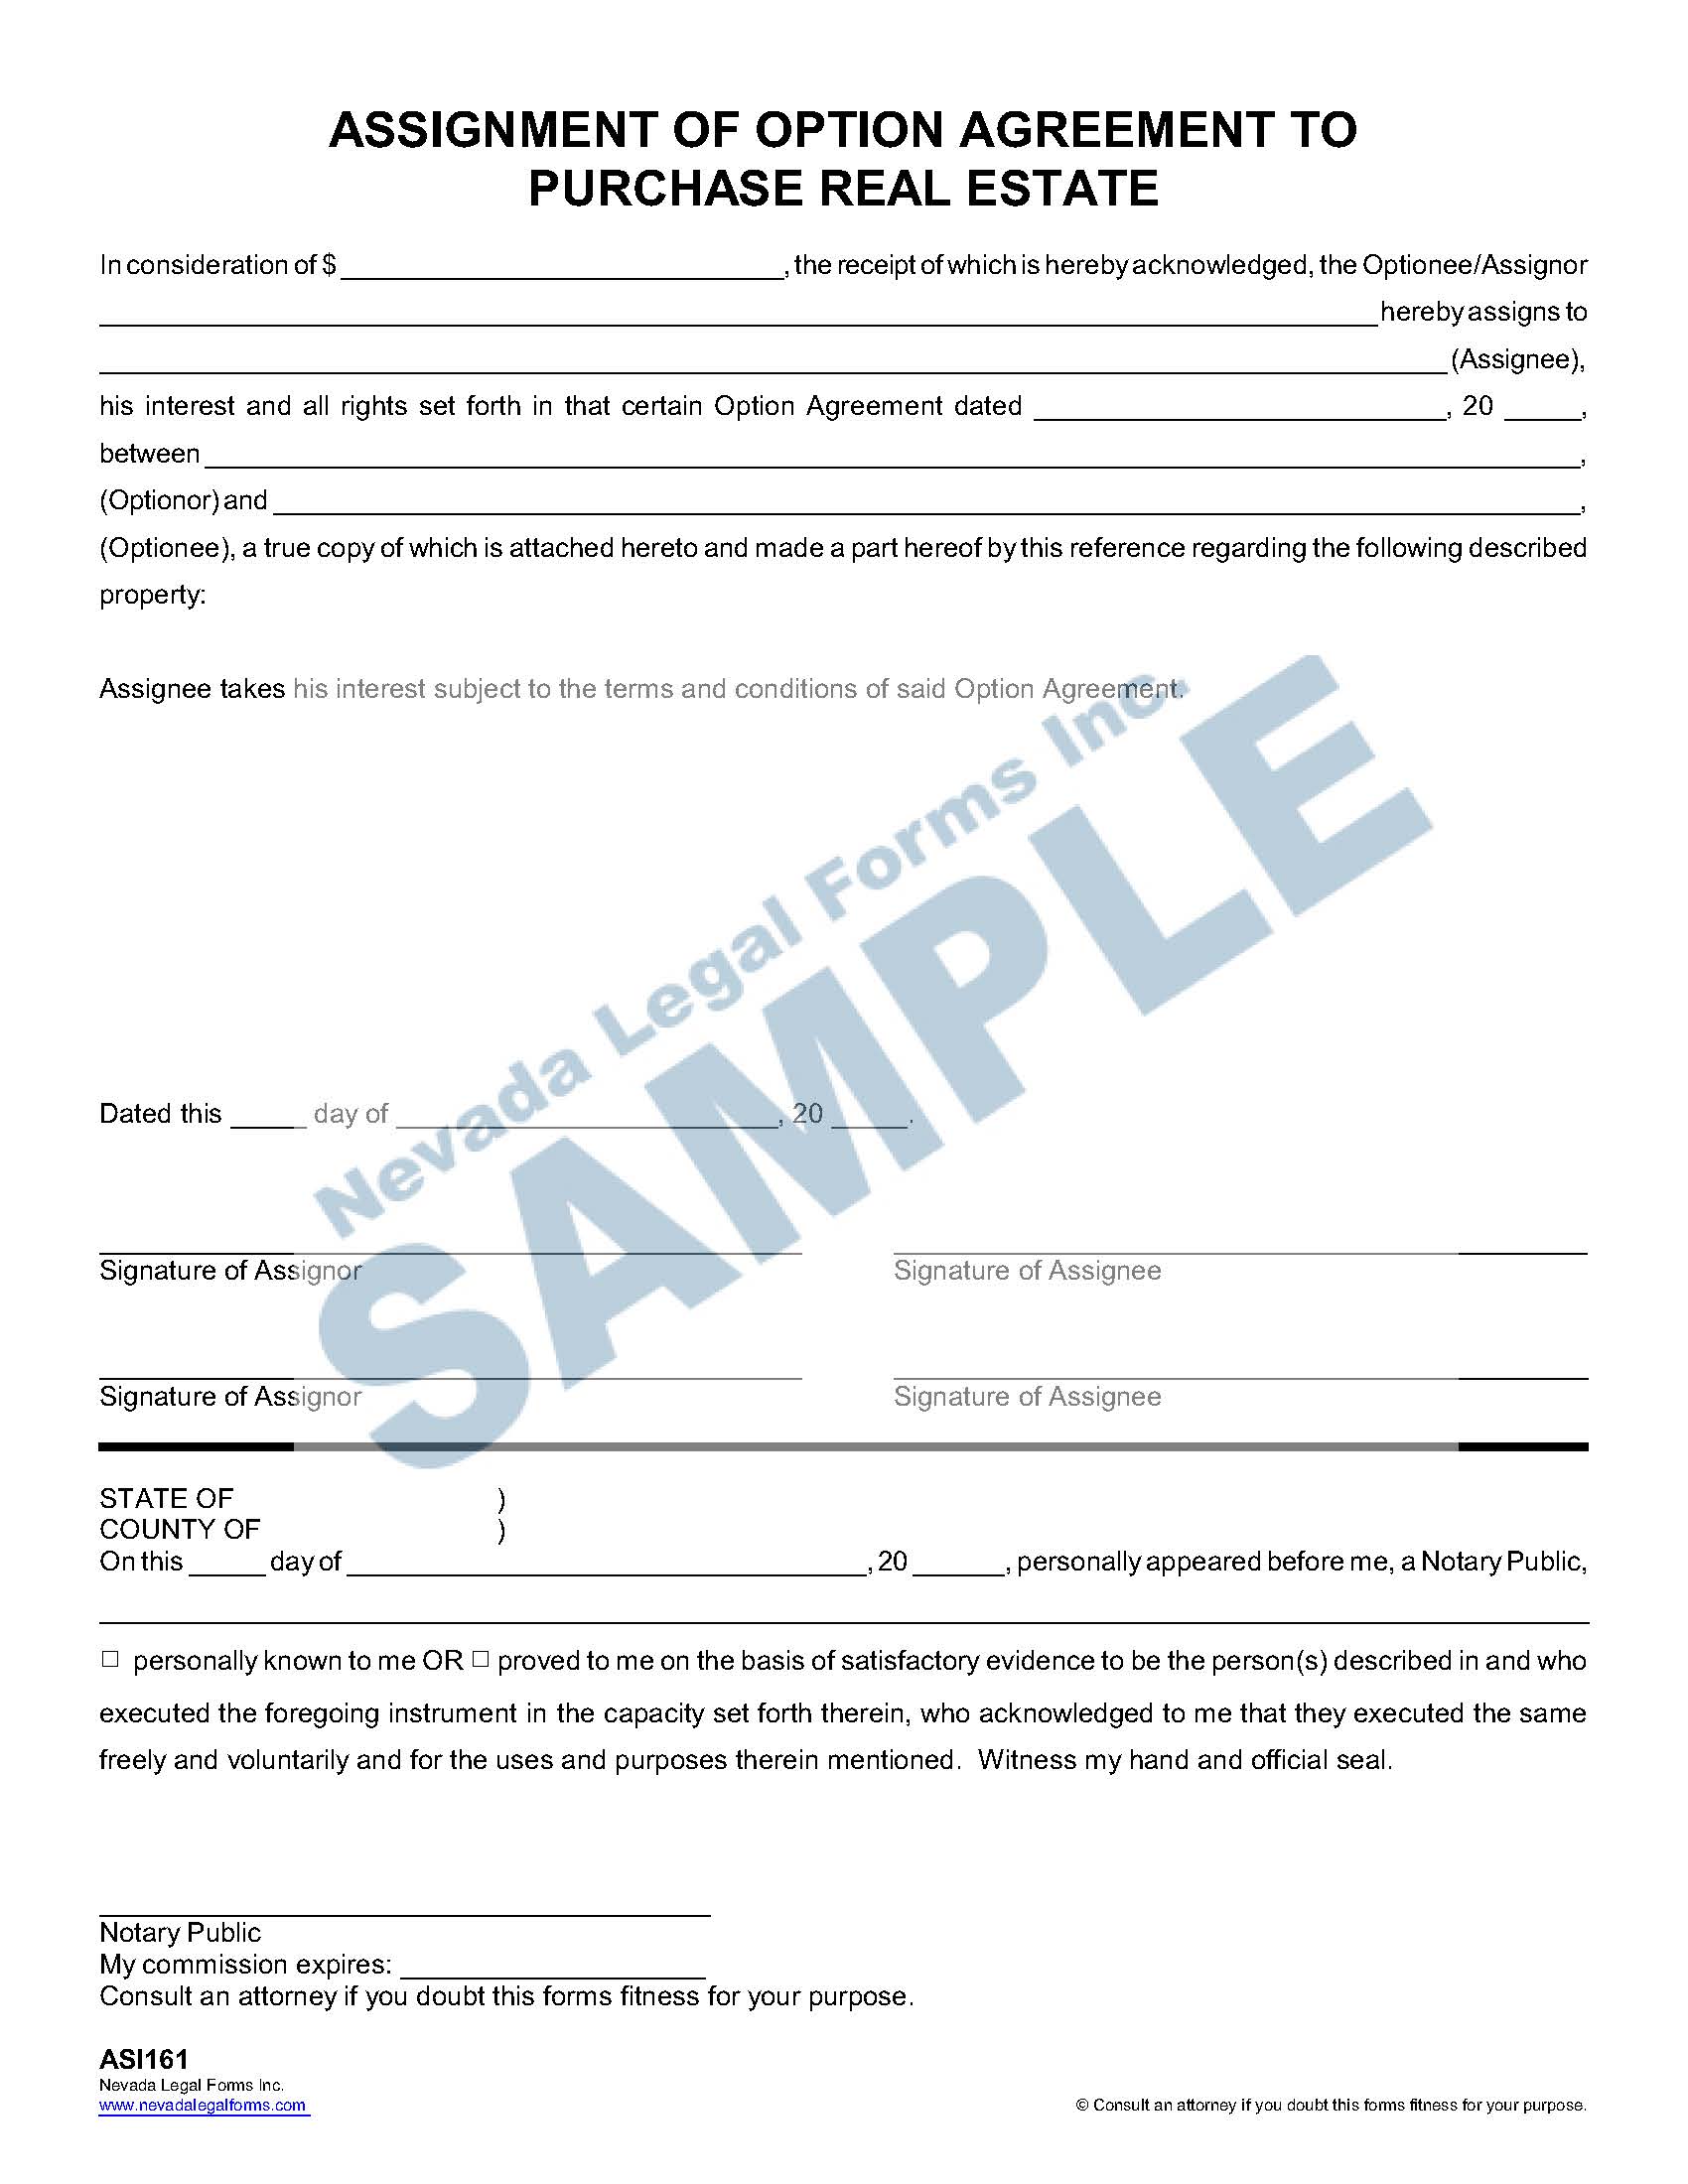 Purchase assignment agreement